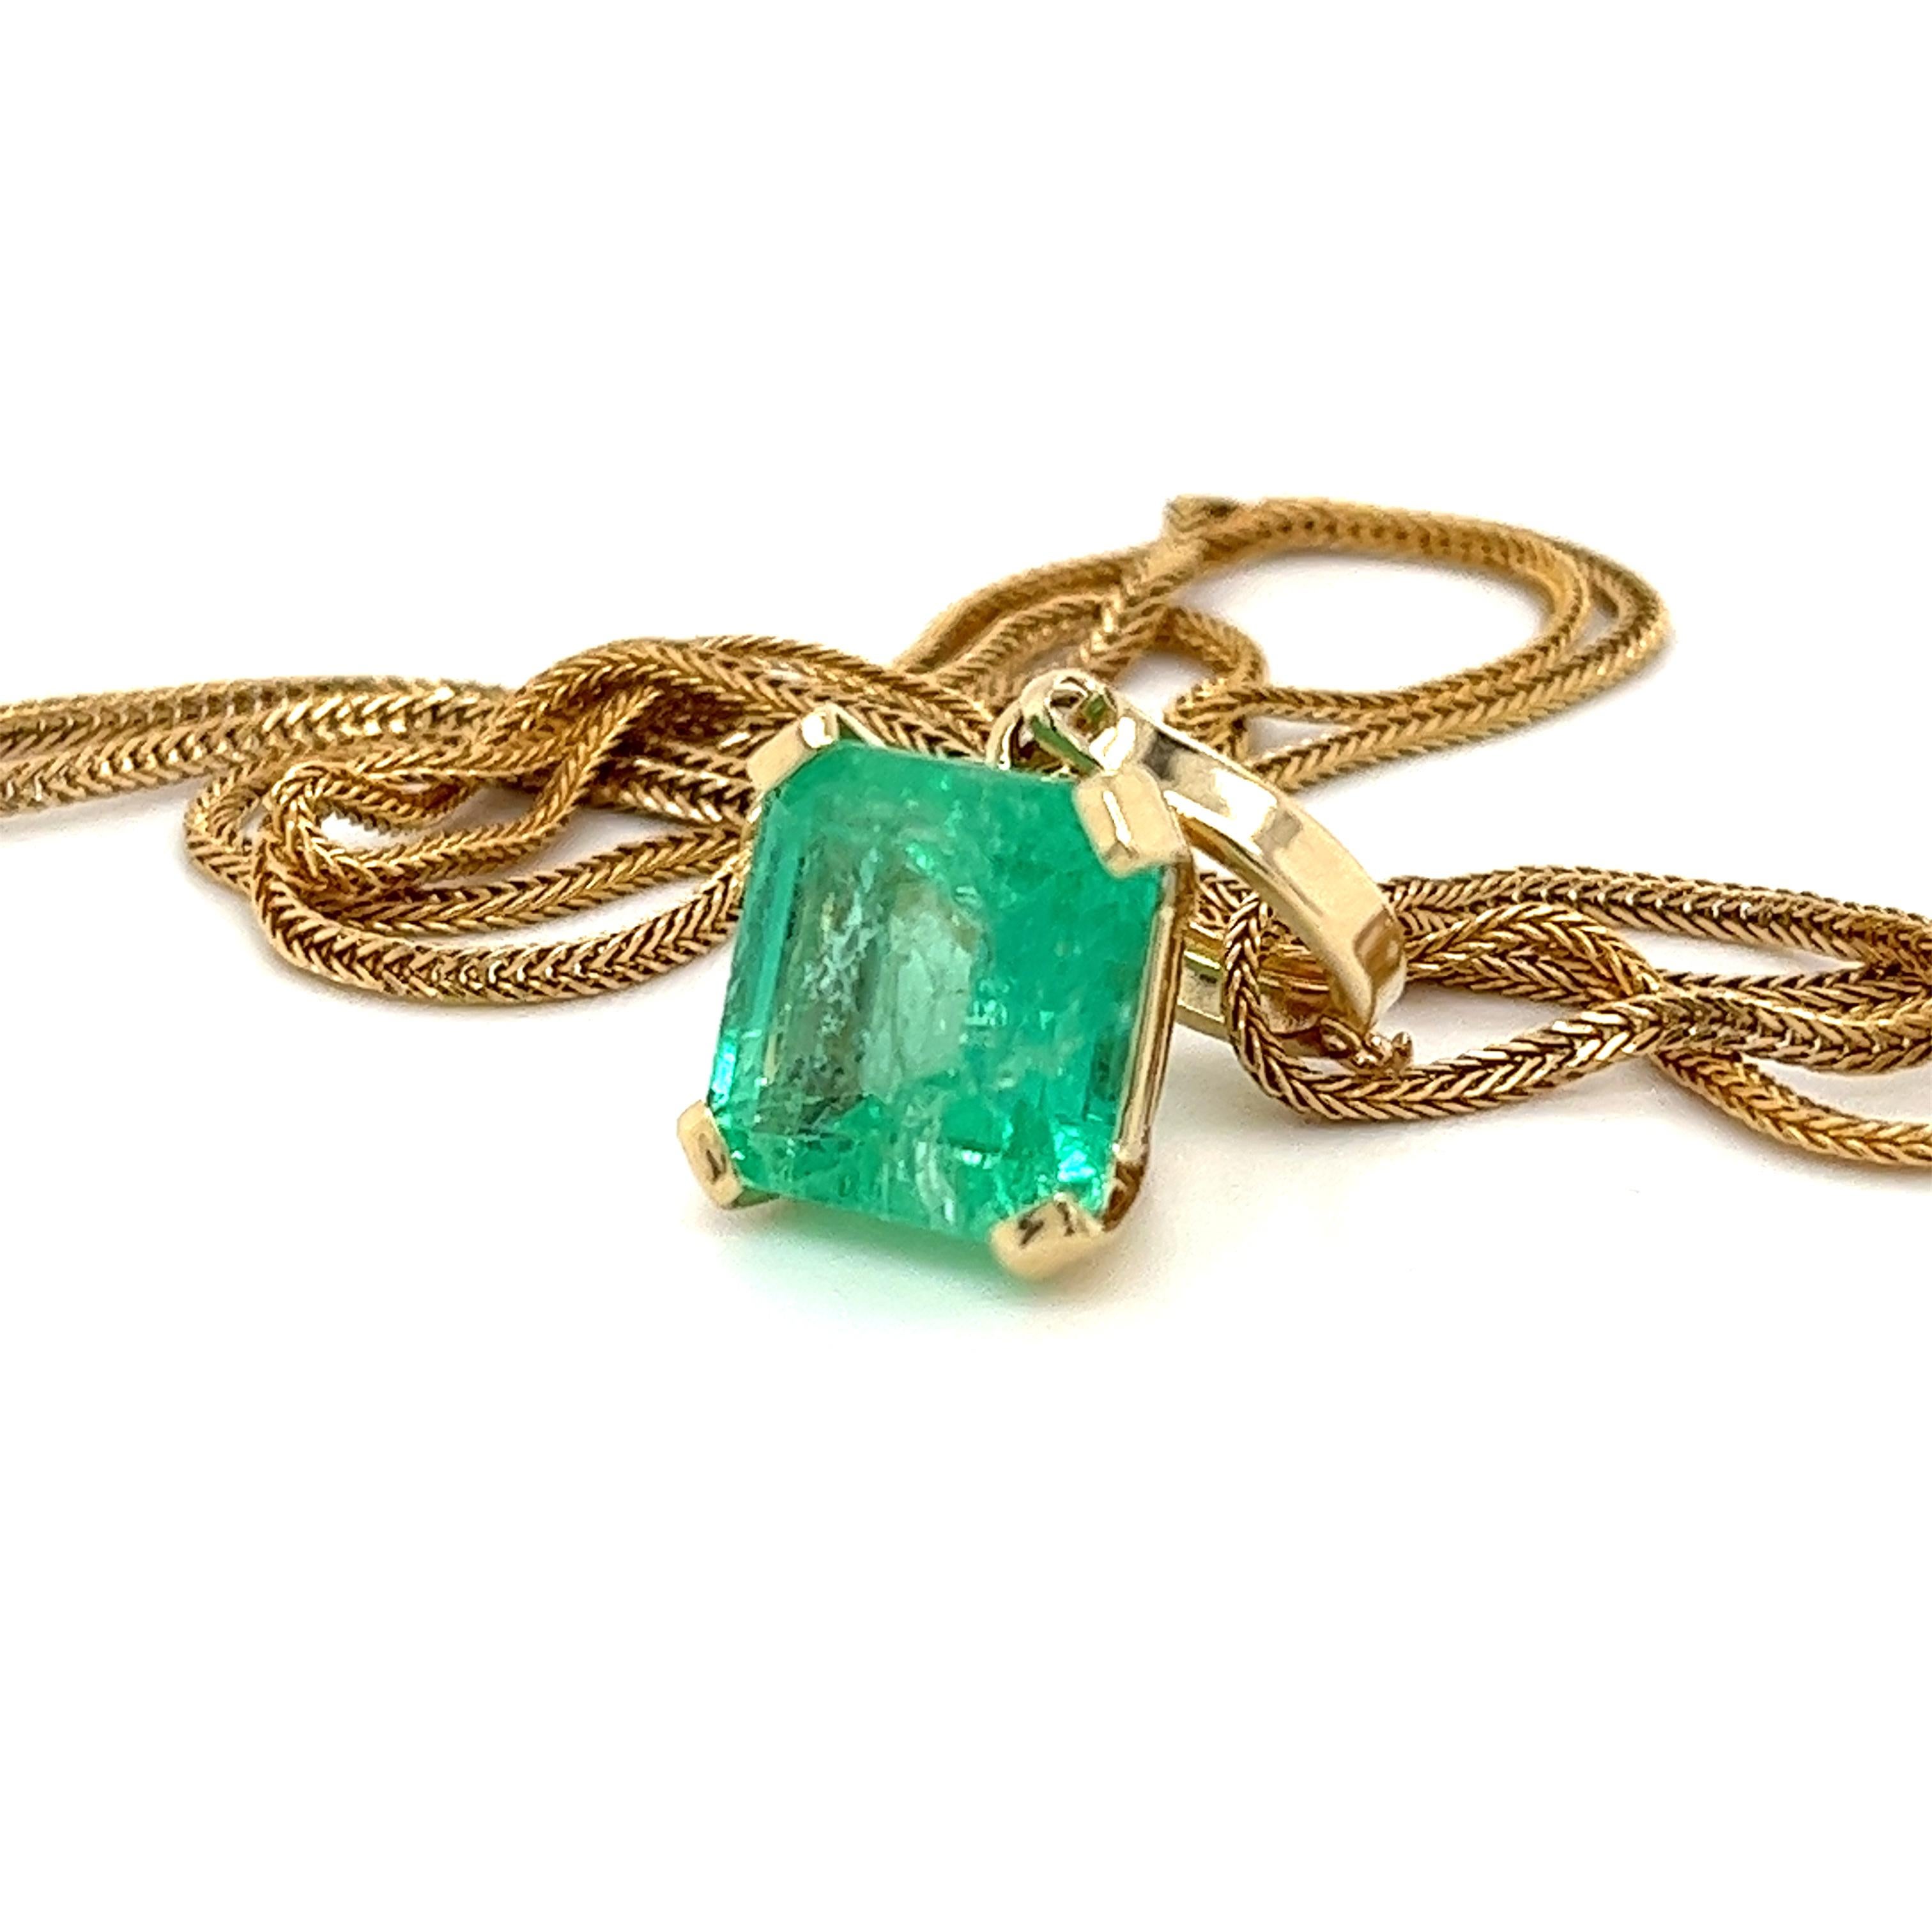 8.34 Carat Colombian Emerald Solitaire Pendant Necklace in 14K Gold In New Condition For Sale In Miami, FL